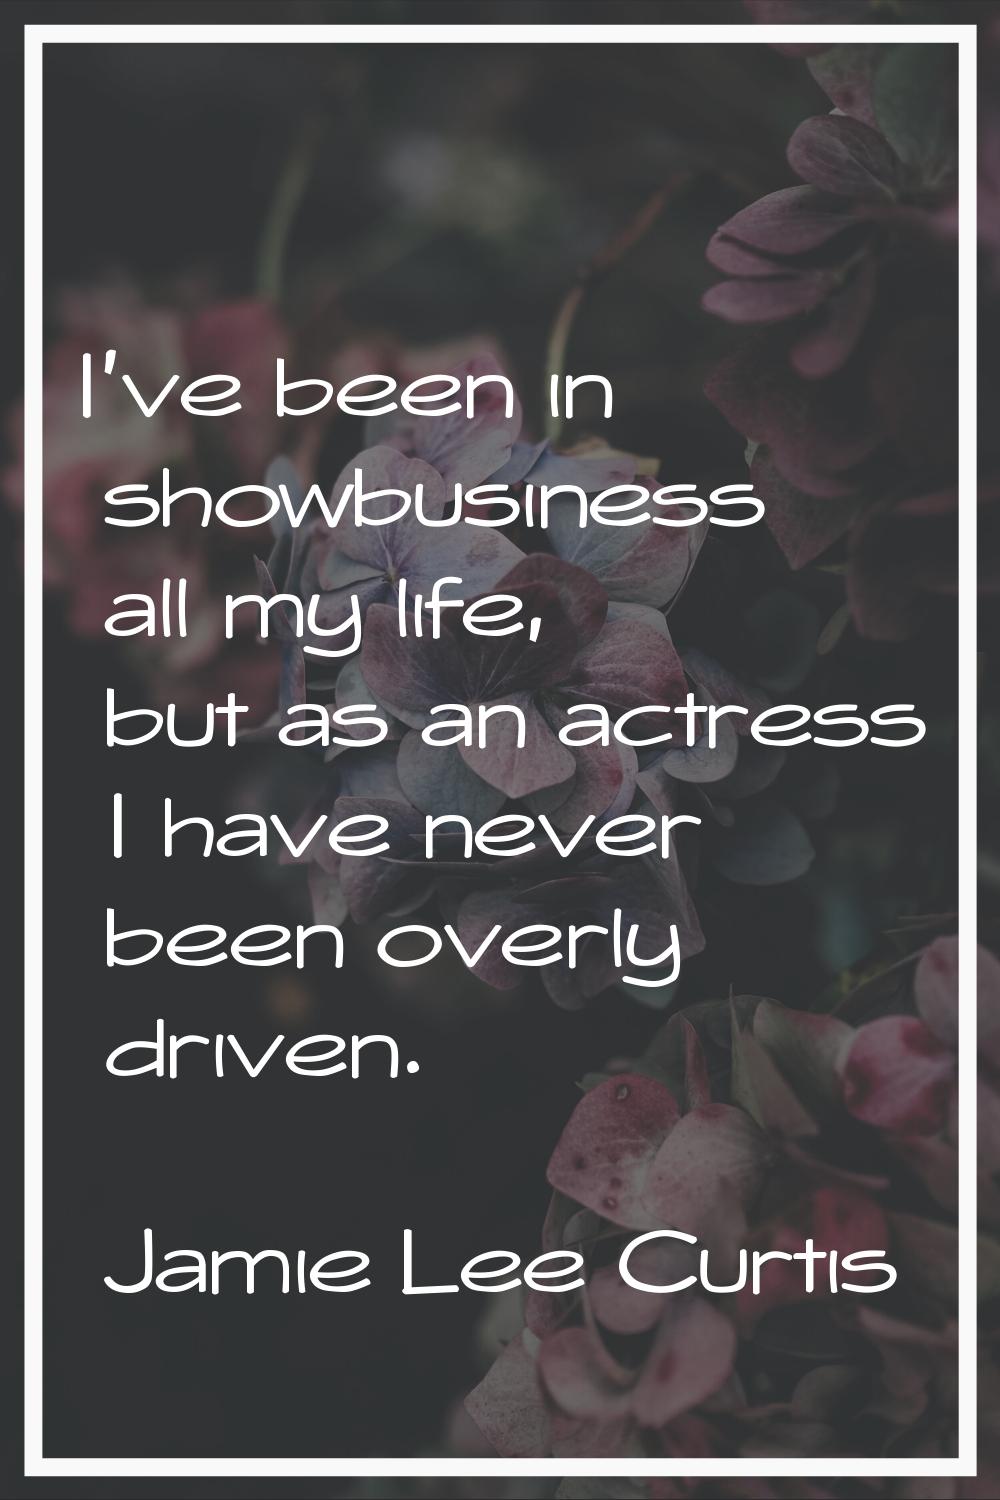 I've been in showbusiness all my life, but as an actress I have never been overly driven.